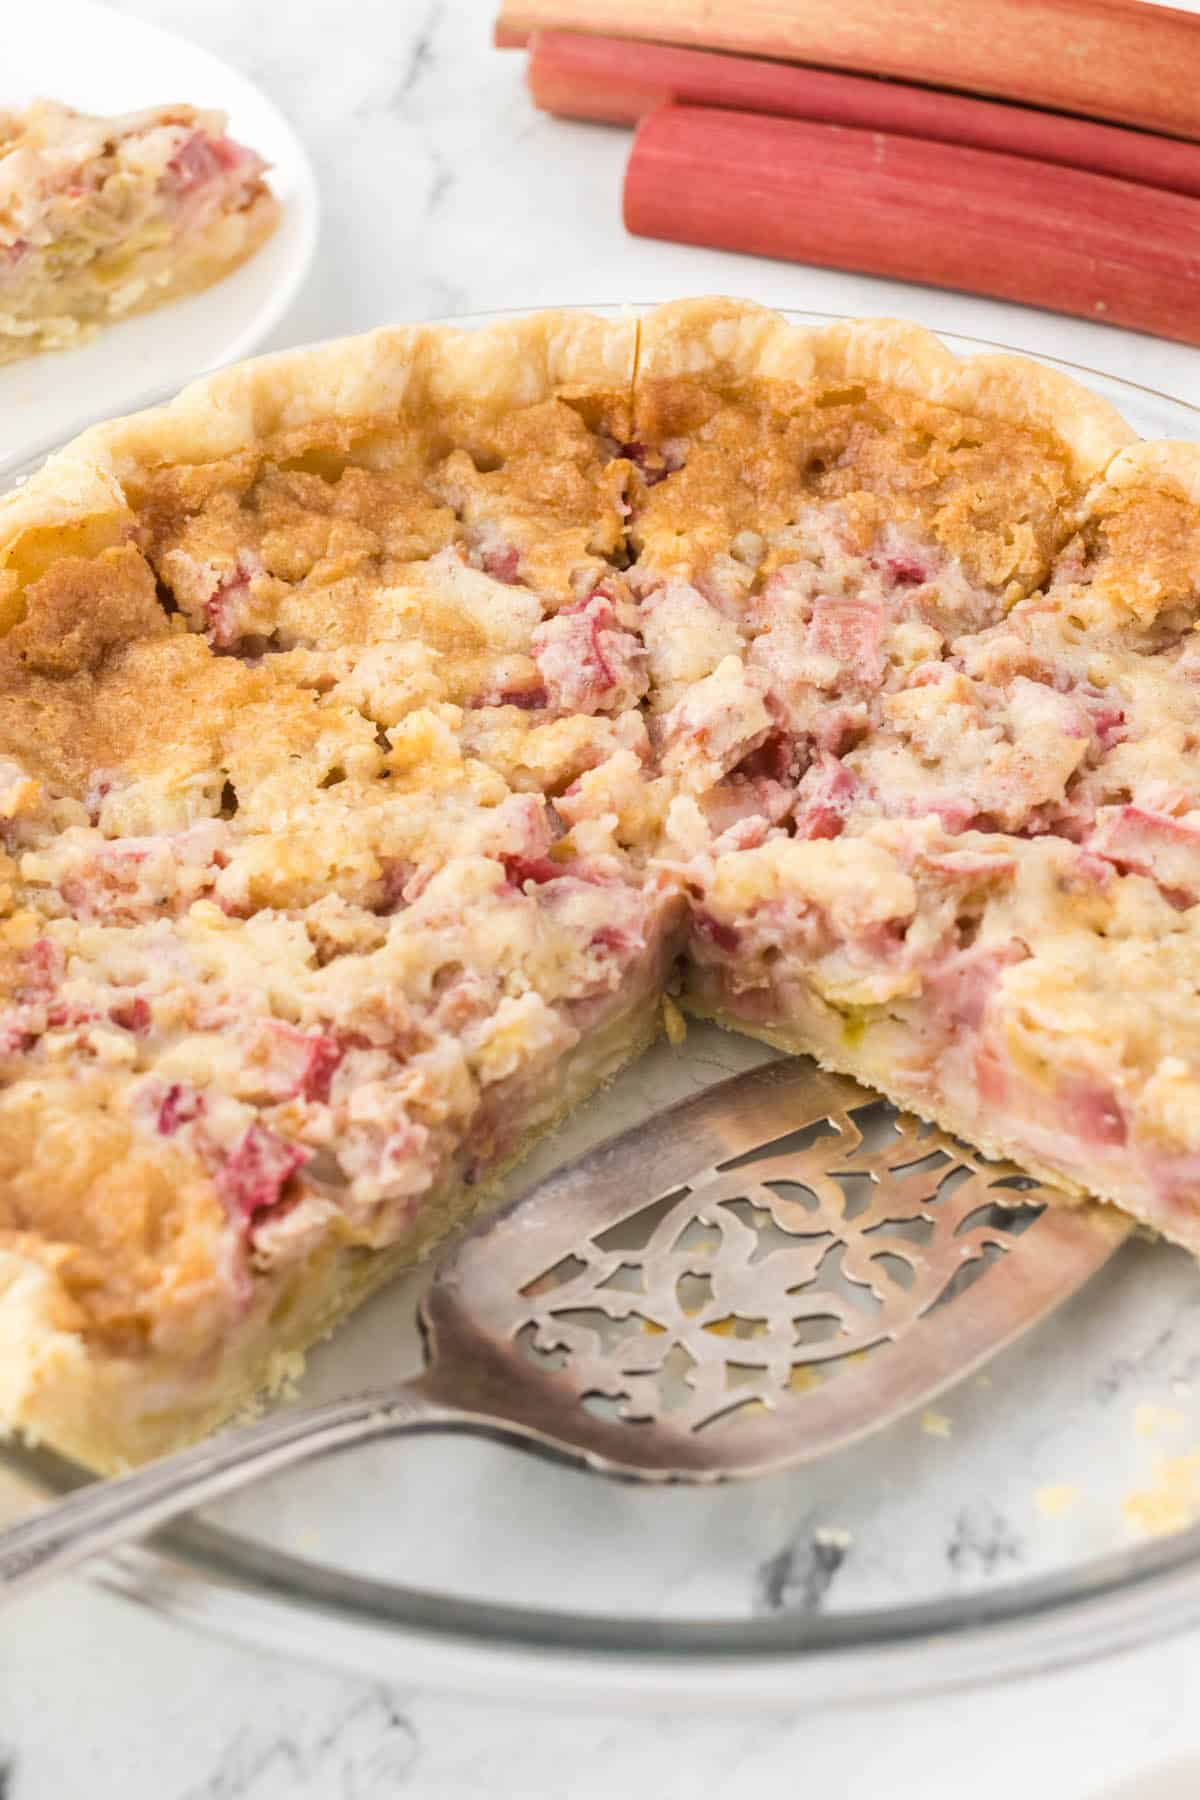 Cream of Rhubarb Pie in a pie plate with knife.